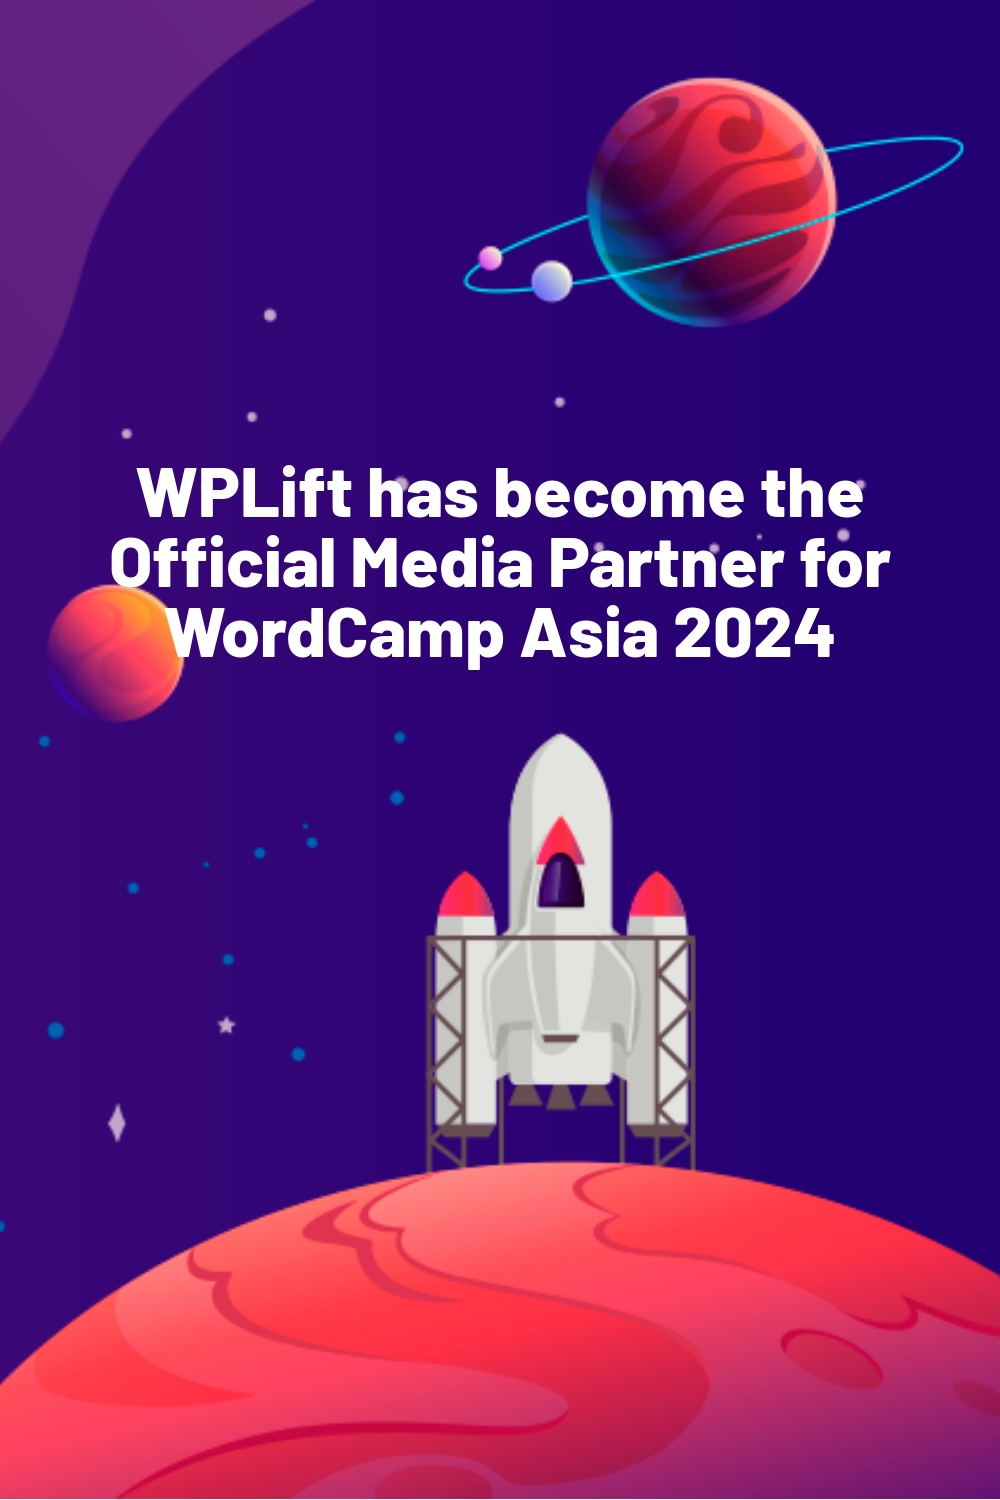 WPLift has become the Official Media Partner for WordCamp Asia 2024